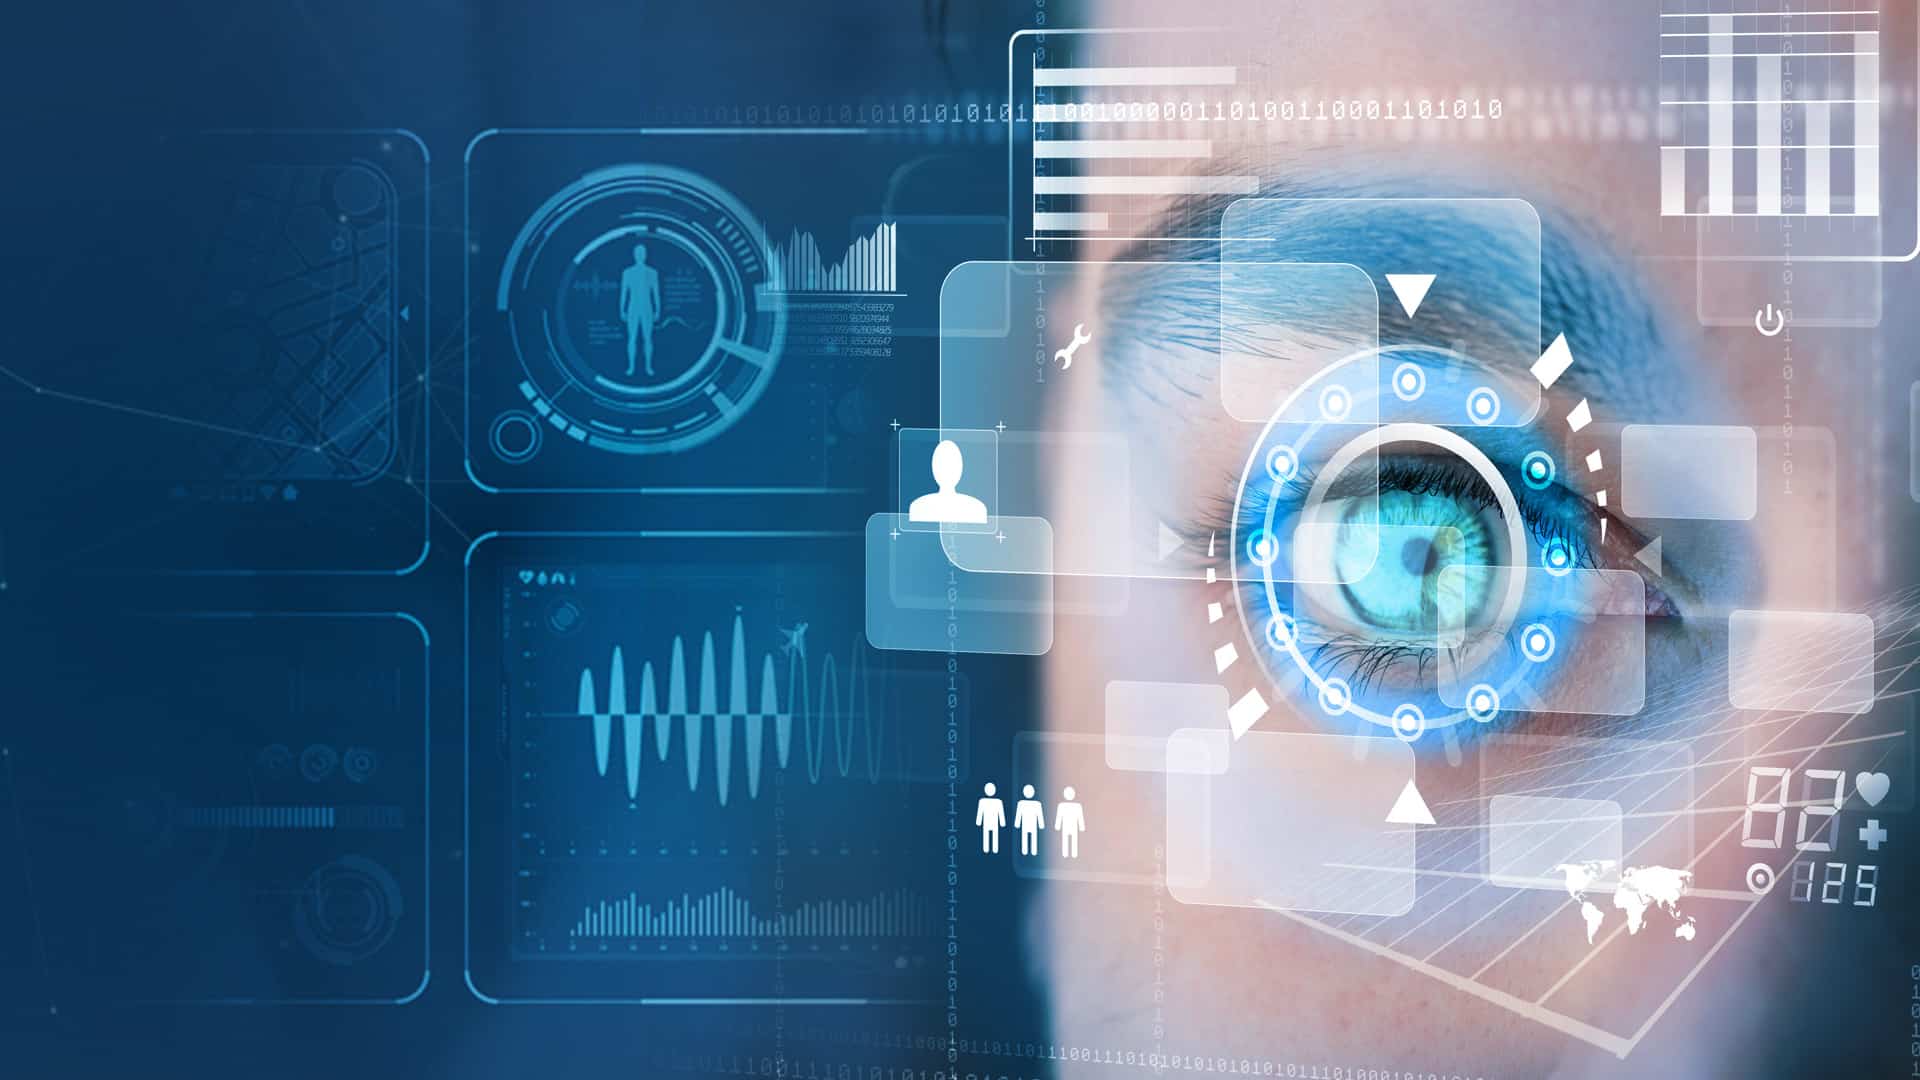 Computer Vision and Image Processing, with GSI Technology